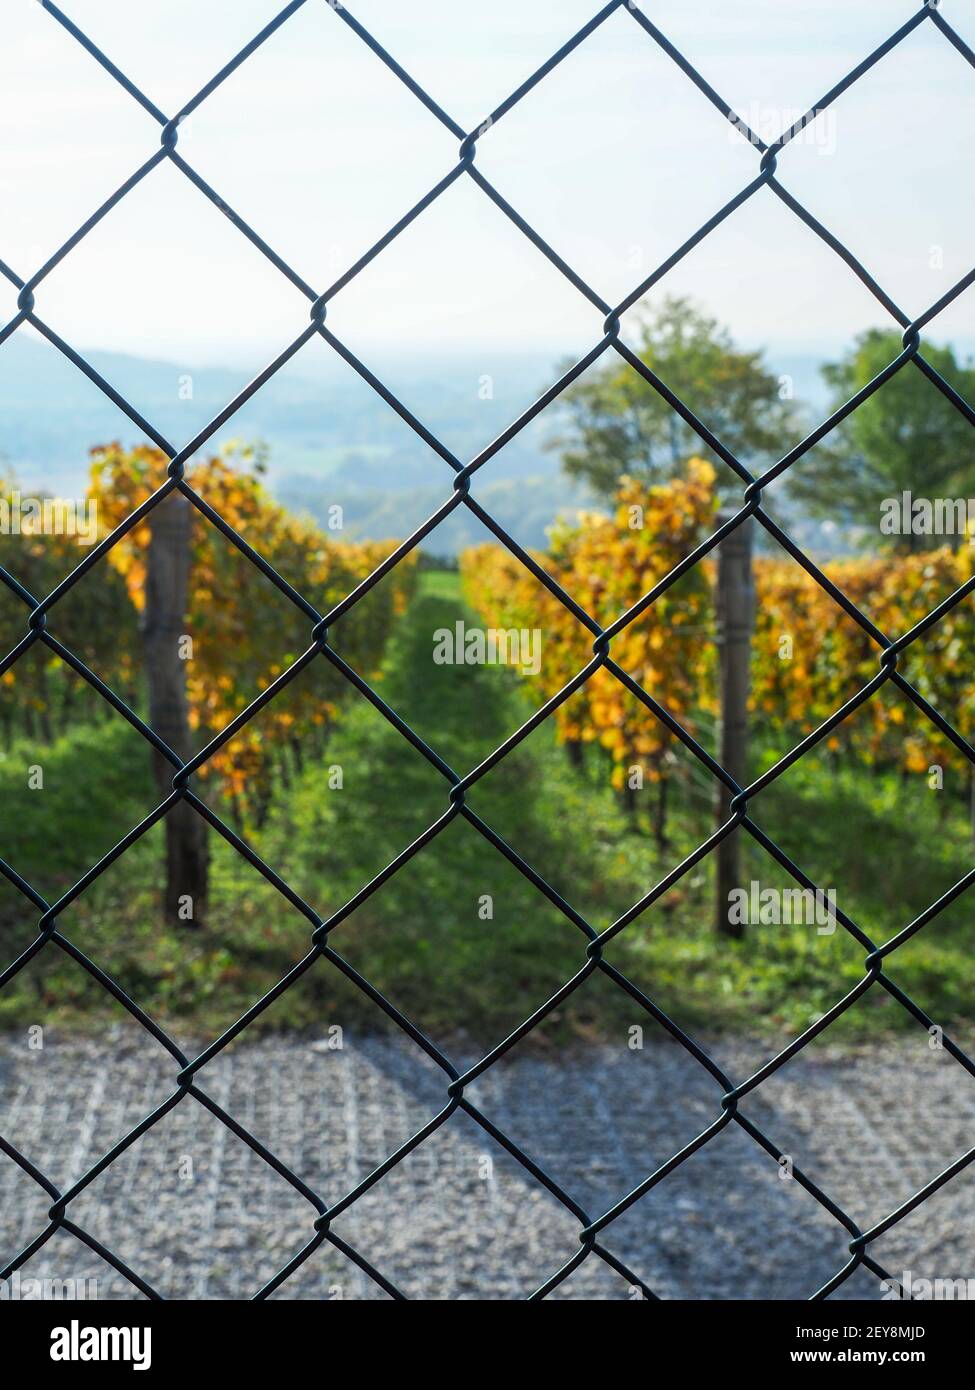 Autumn vineyard. View from behind metal wire mesh fence. Close up. Winemaking concept.  Stock Photo